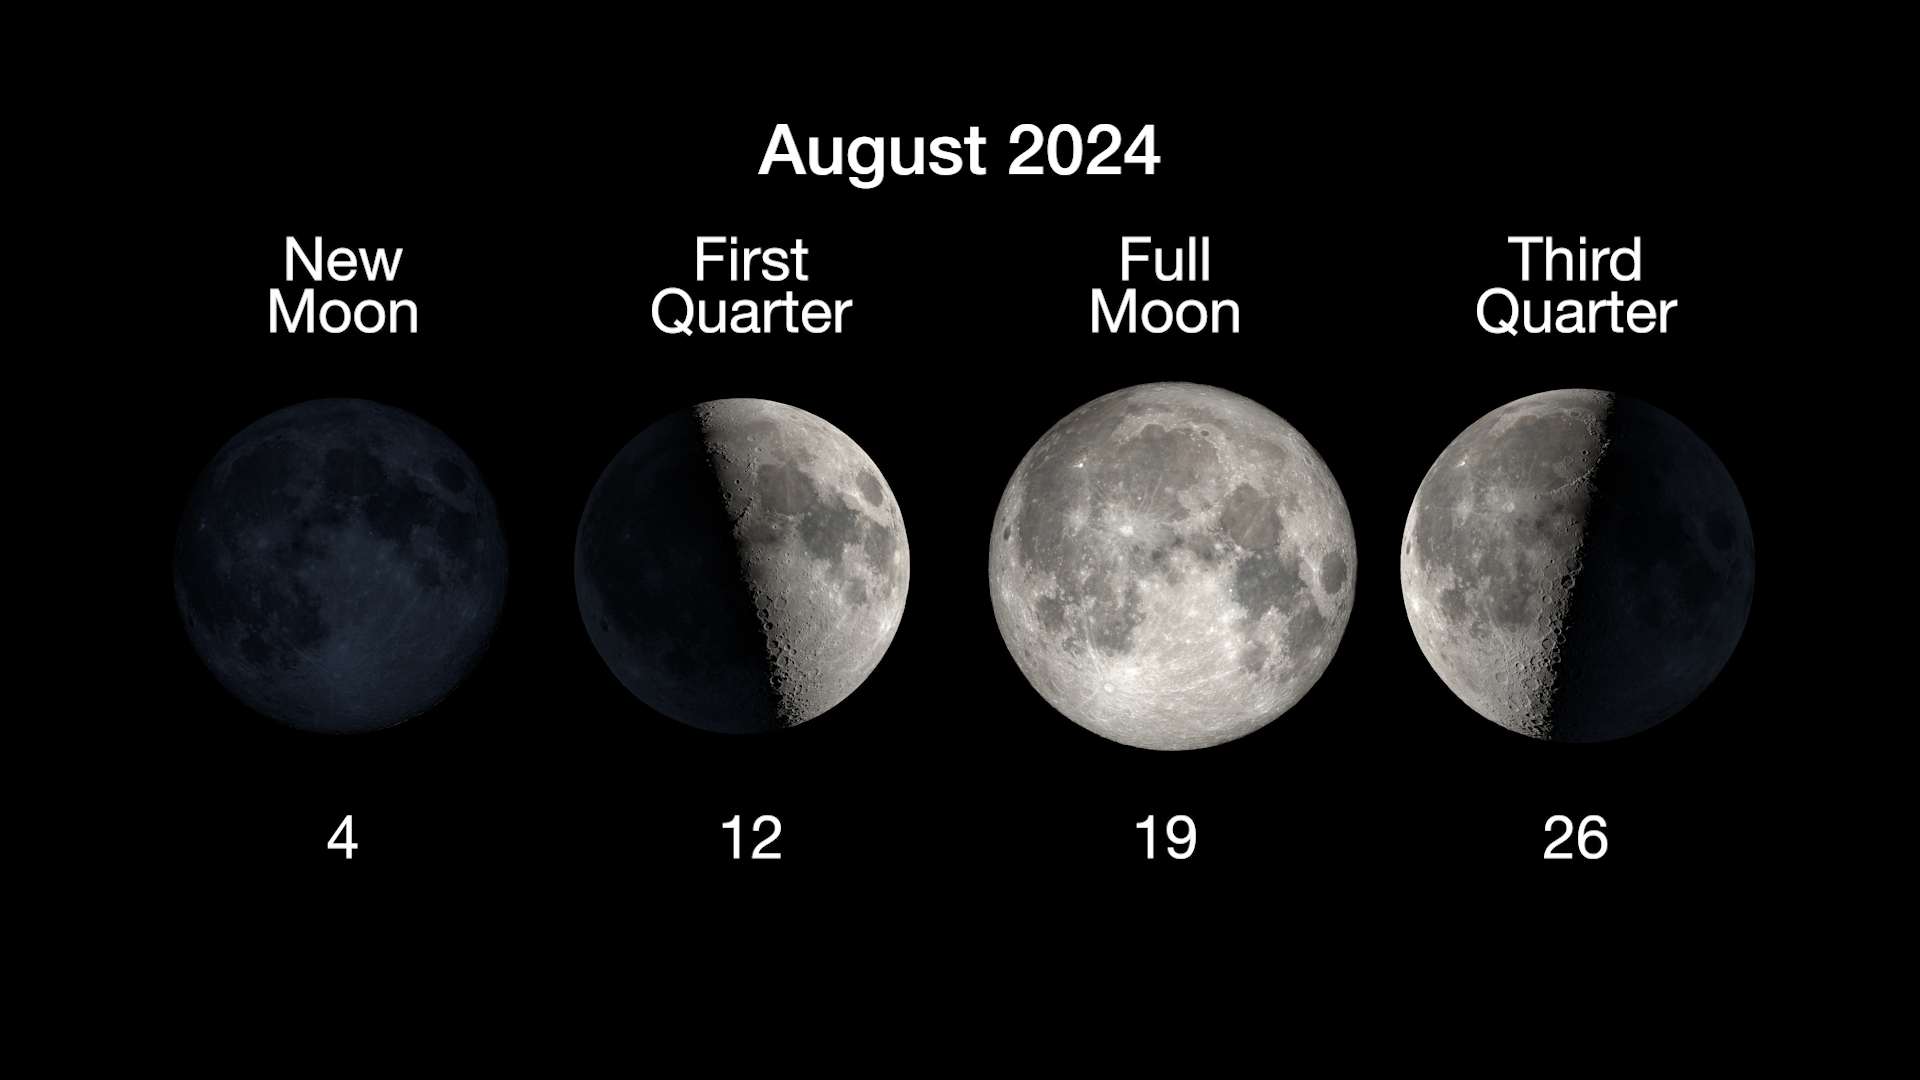 The main phases of the Moon are illustrated in a horizontal row, with the new moon on August 4th, first quarter on August 12th, full moon on August 19th, and the third quarter moon on August 26th